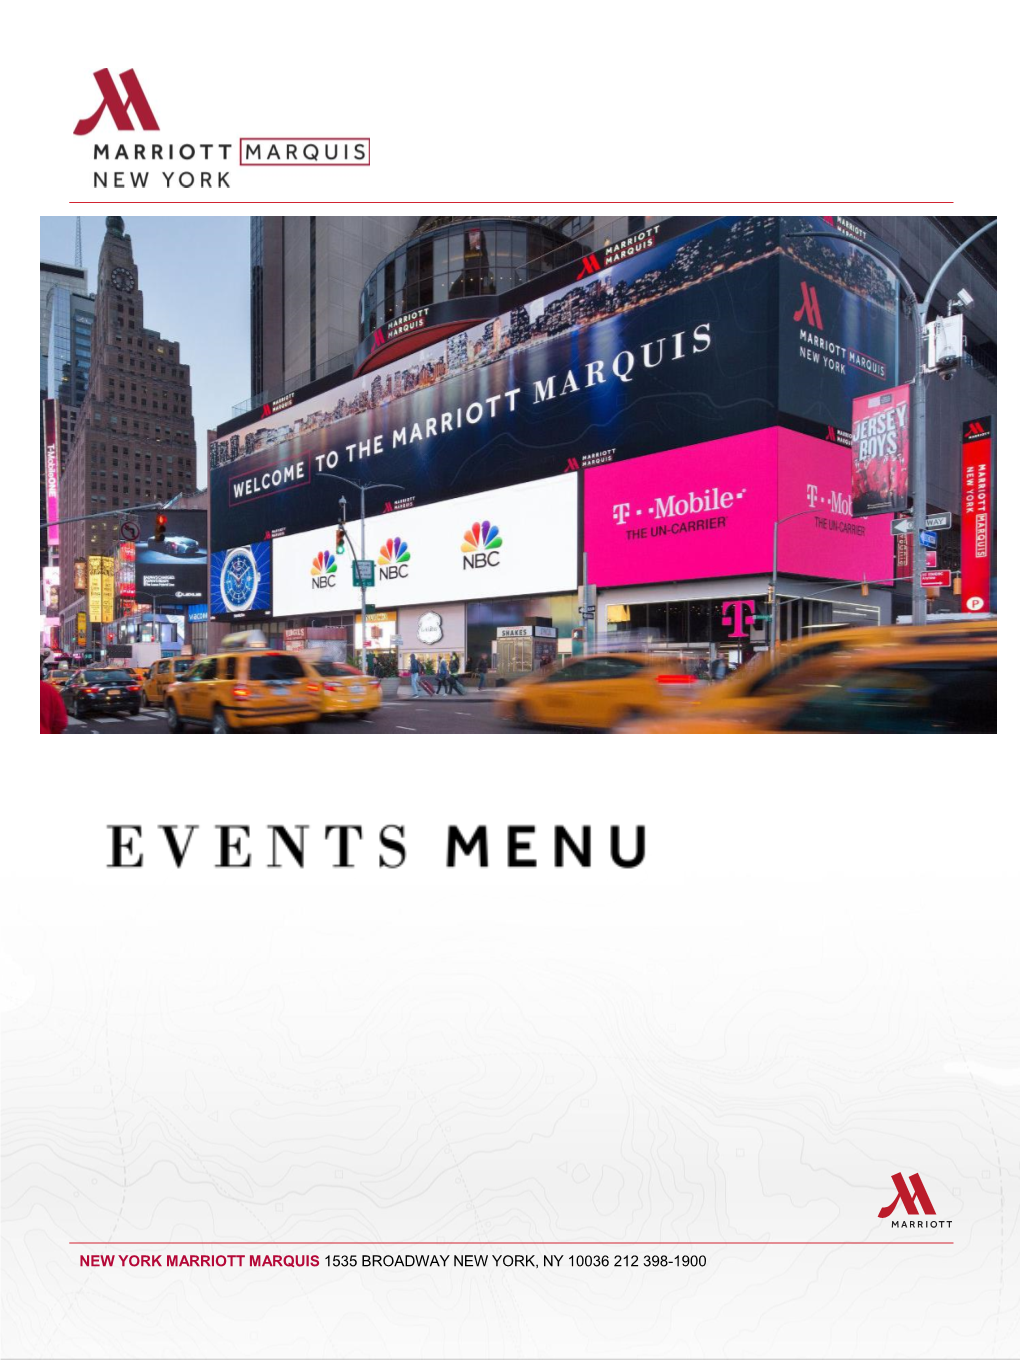 New York Marriott Marquis 1535 Broadway New York, Ny 10036 212 398-1900 Table of Contents